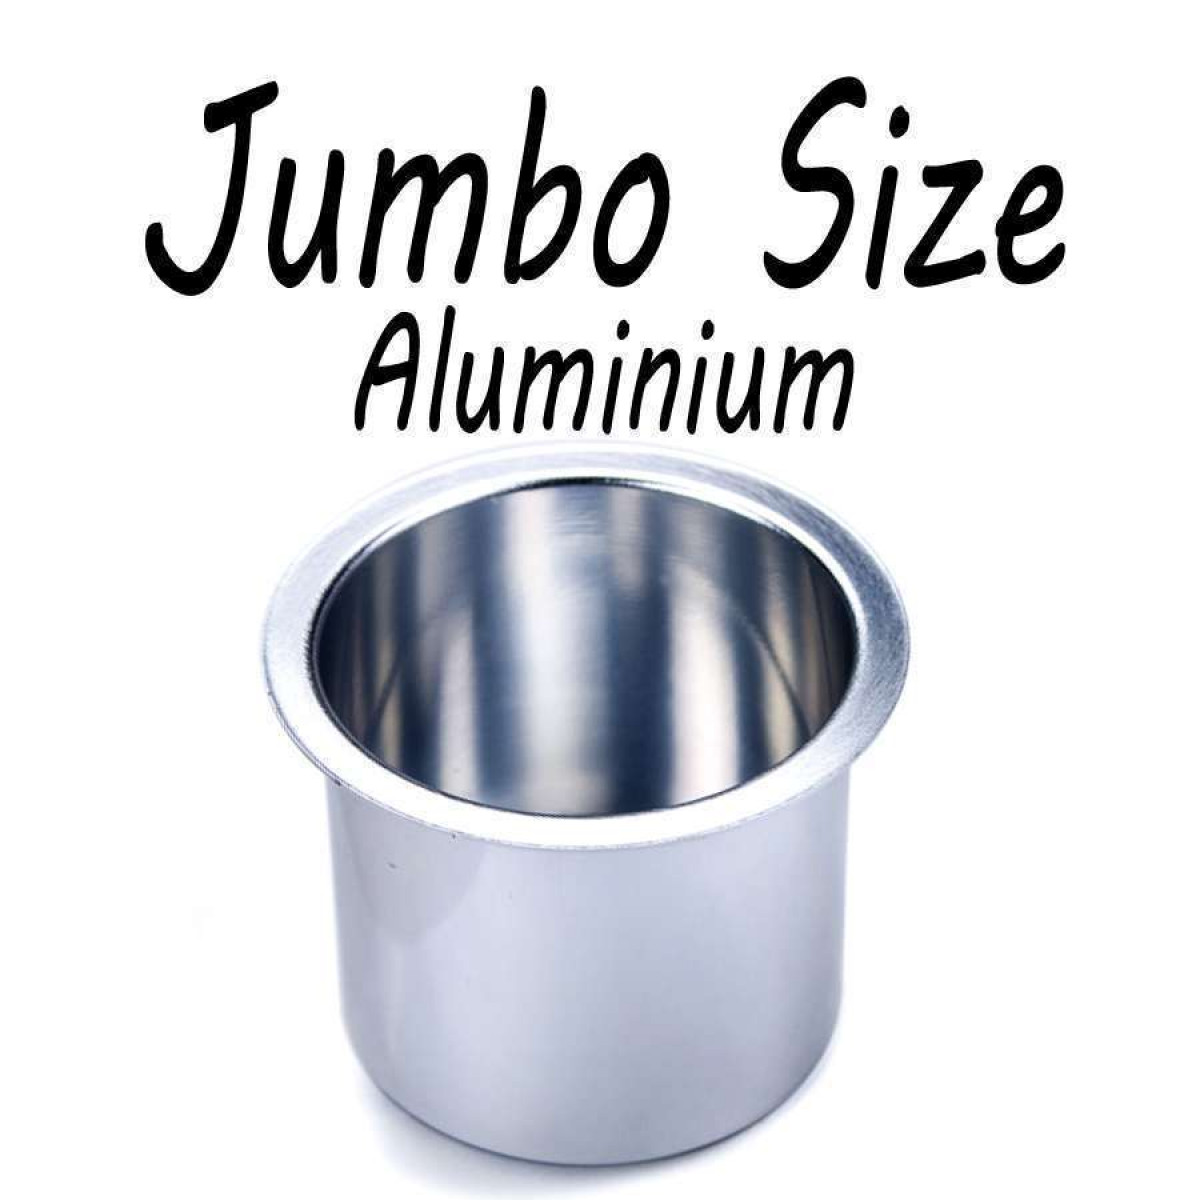 10 Item 71-0002x10 Ten Aluminum Cup Holders Silver for Poker Tables 